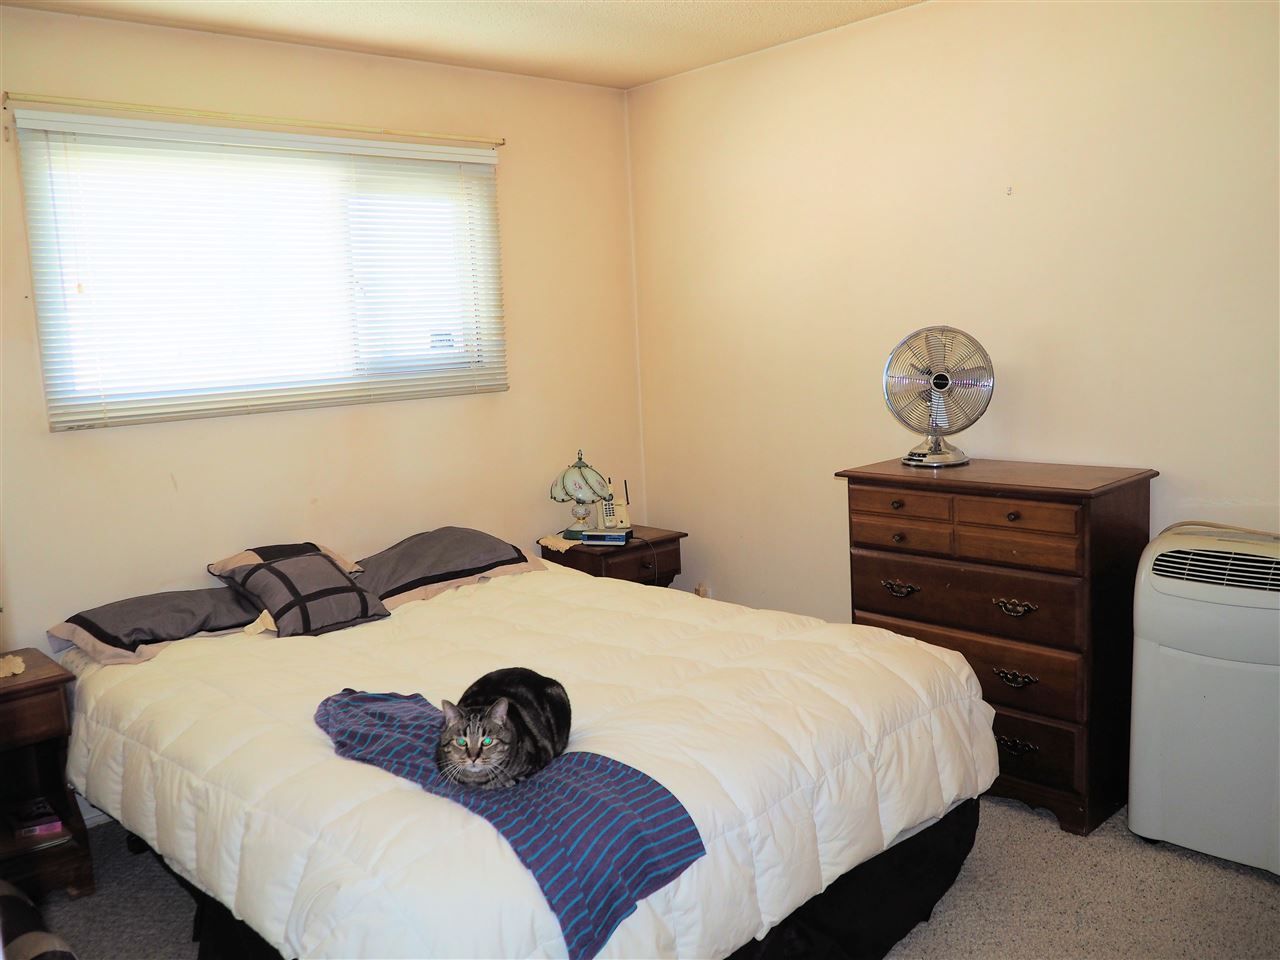 Photo 9: Photos: 487 S OGILVIE Street in Prince George: Quinson House for sale (PG City West (Zone 71))  : MLS®# R2097655